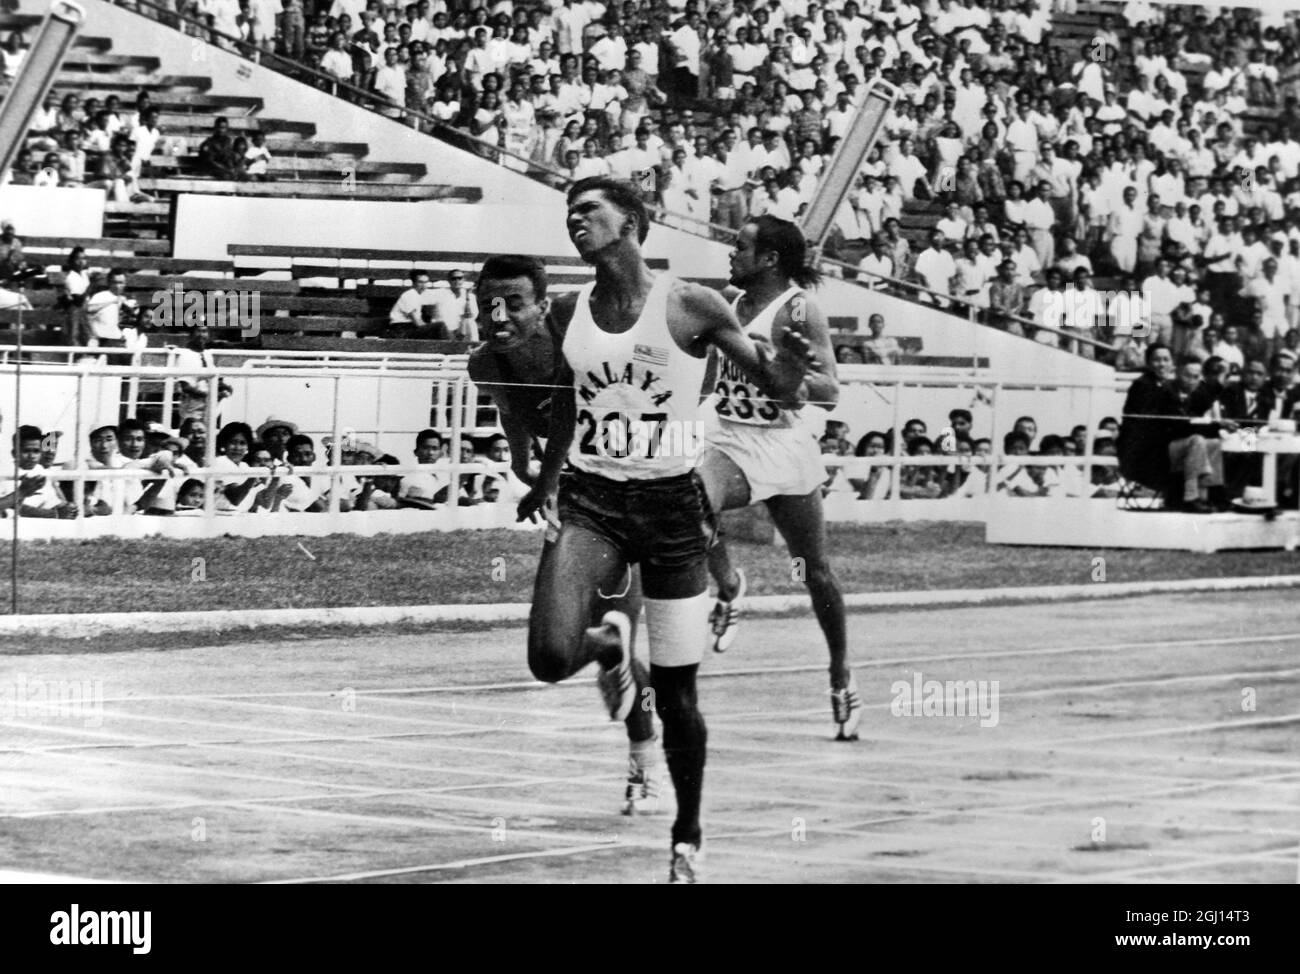 JEGATHESAN M WINS AT ASIAN GAMES IN INDONESIA - ; 5 SEPTEMBER 1962 Stock Photo